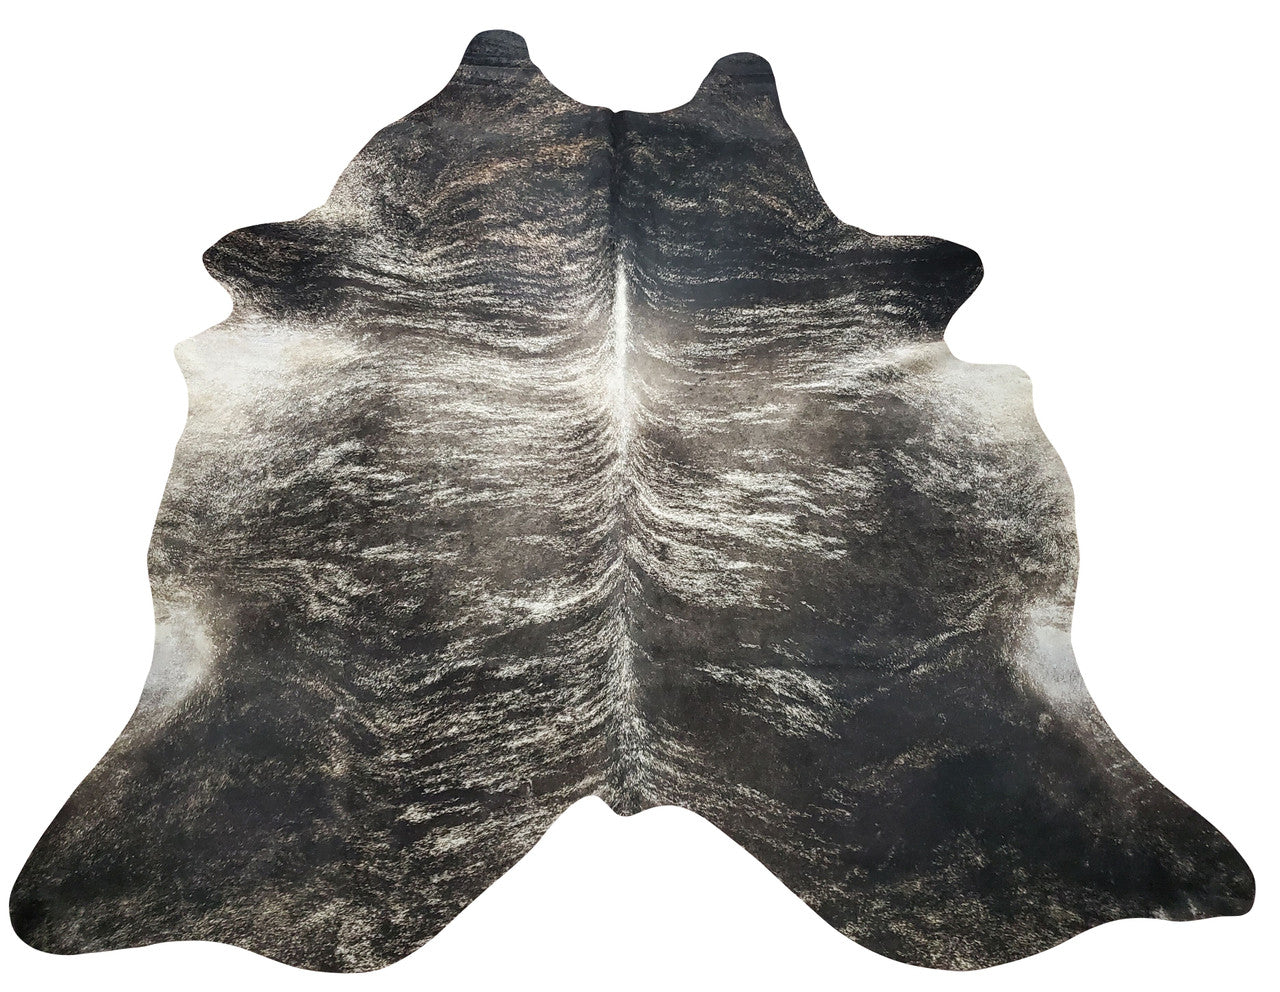 Brindle cowhide rugs if chooses correctly and in large size is great to mix all the key pieces of furniture in the room, from fireplace mantel to entryway decor. 